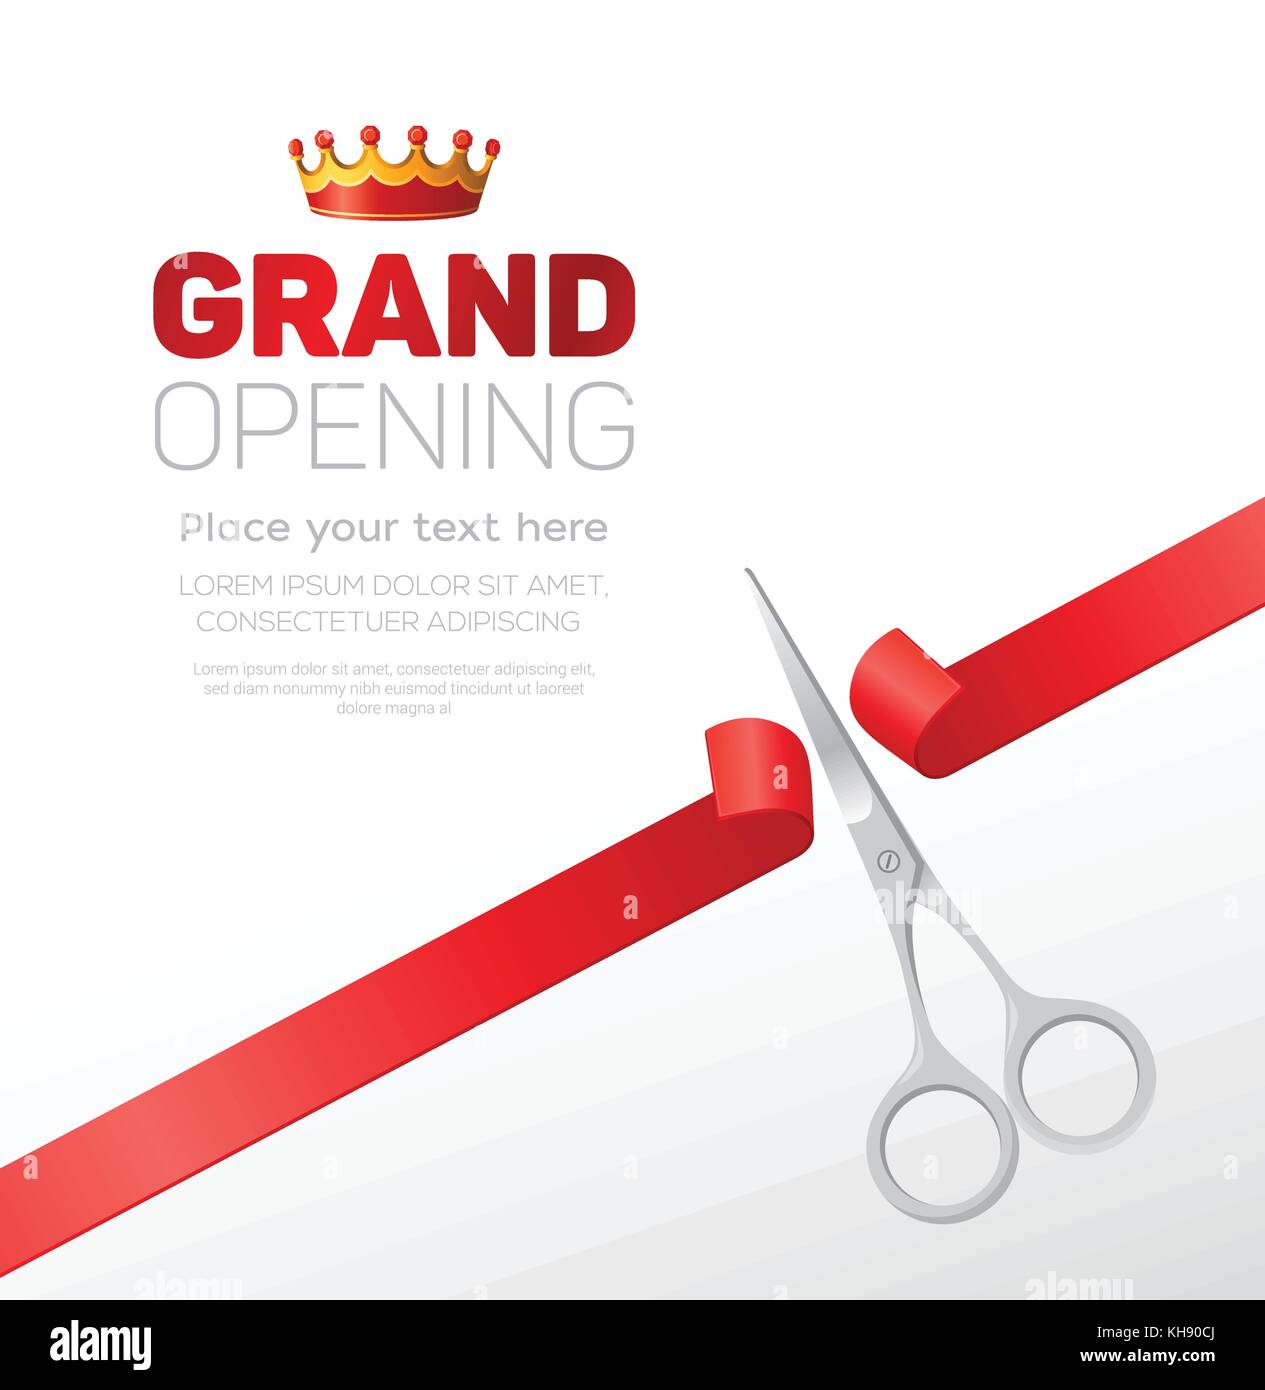 Grand Opening Template